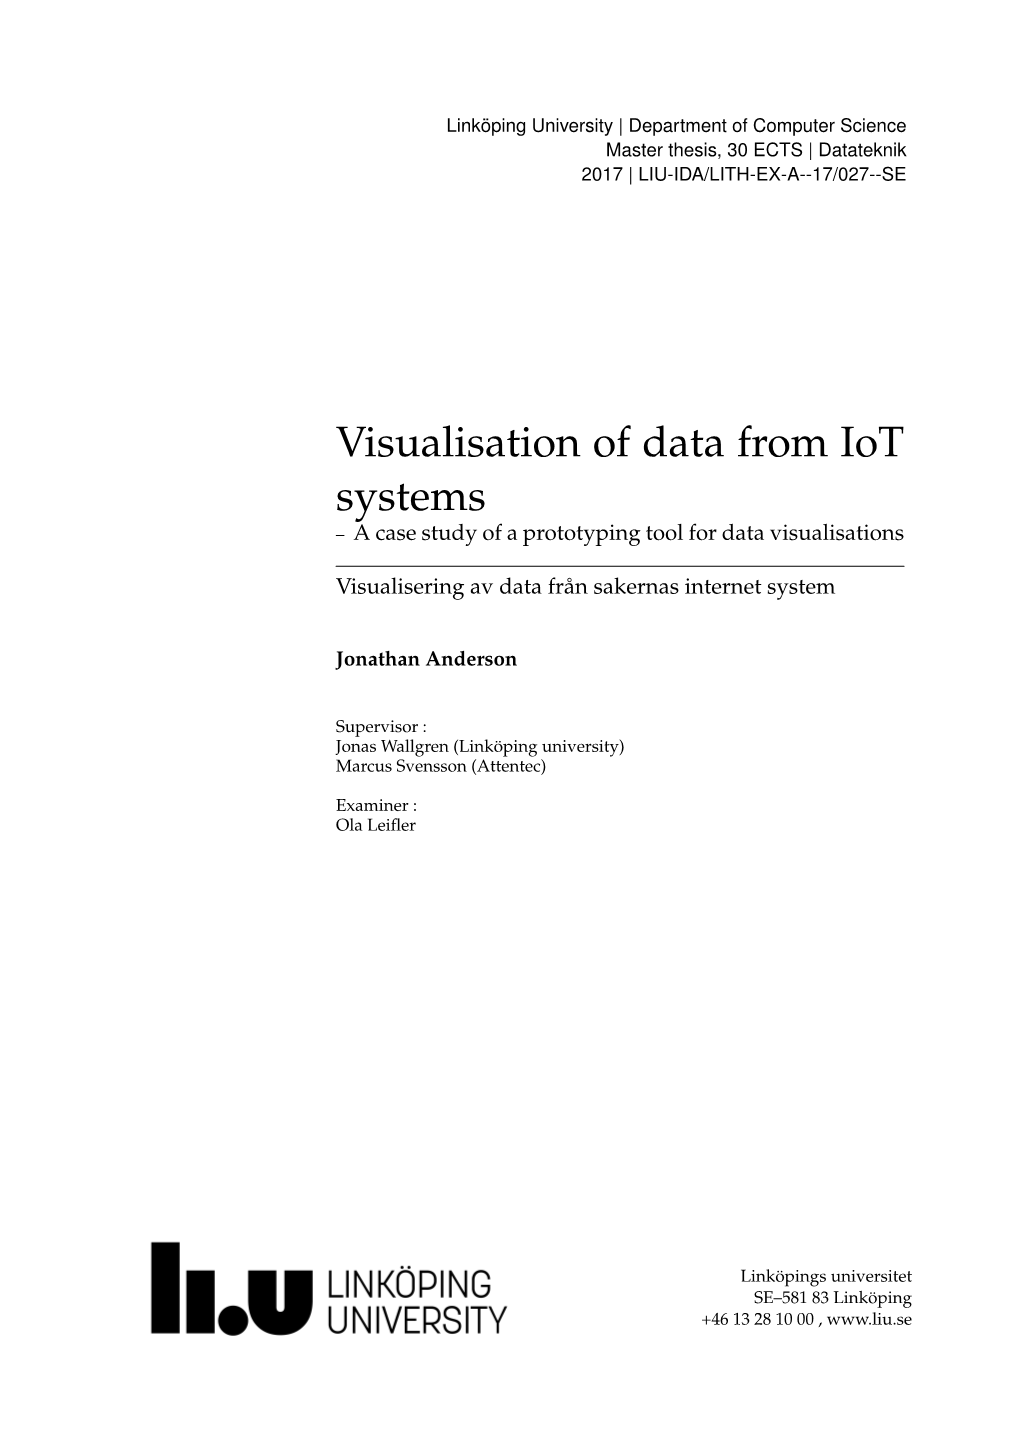 Visualisation of Data from Iot Systems – a Case Study of a Prototyping Tool for Data Visualisations